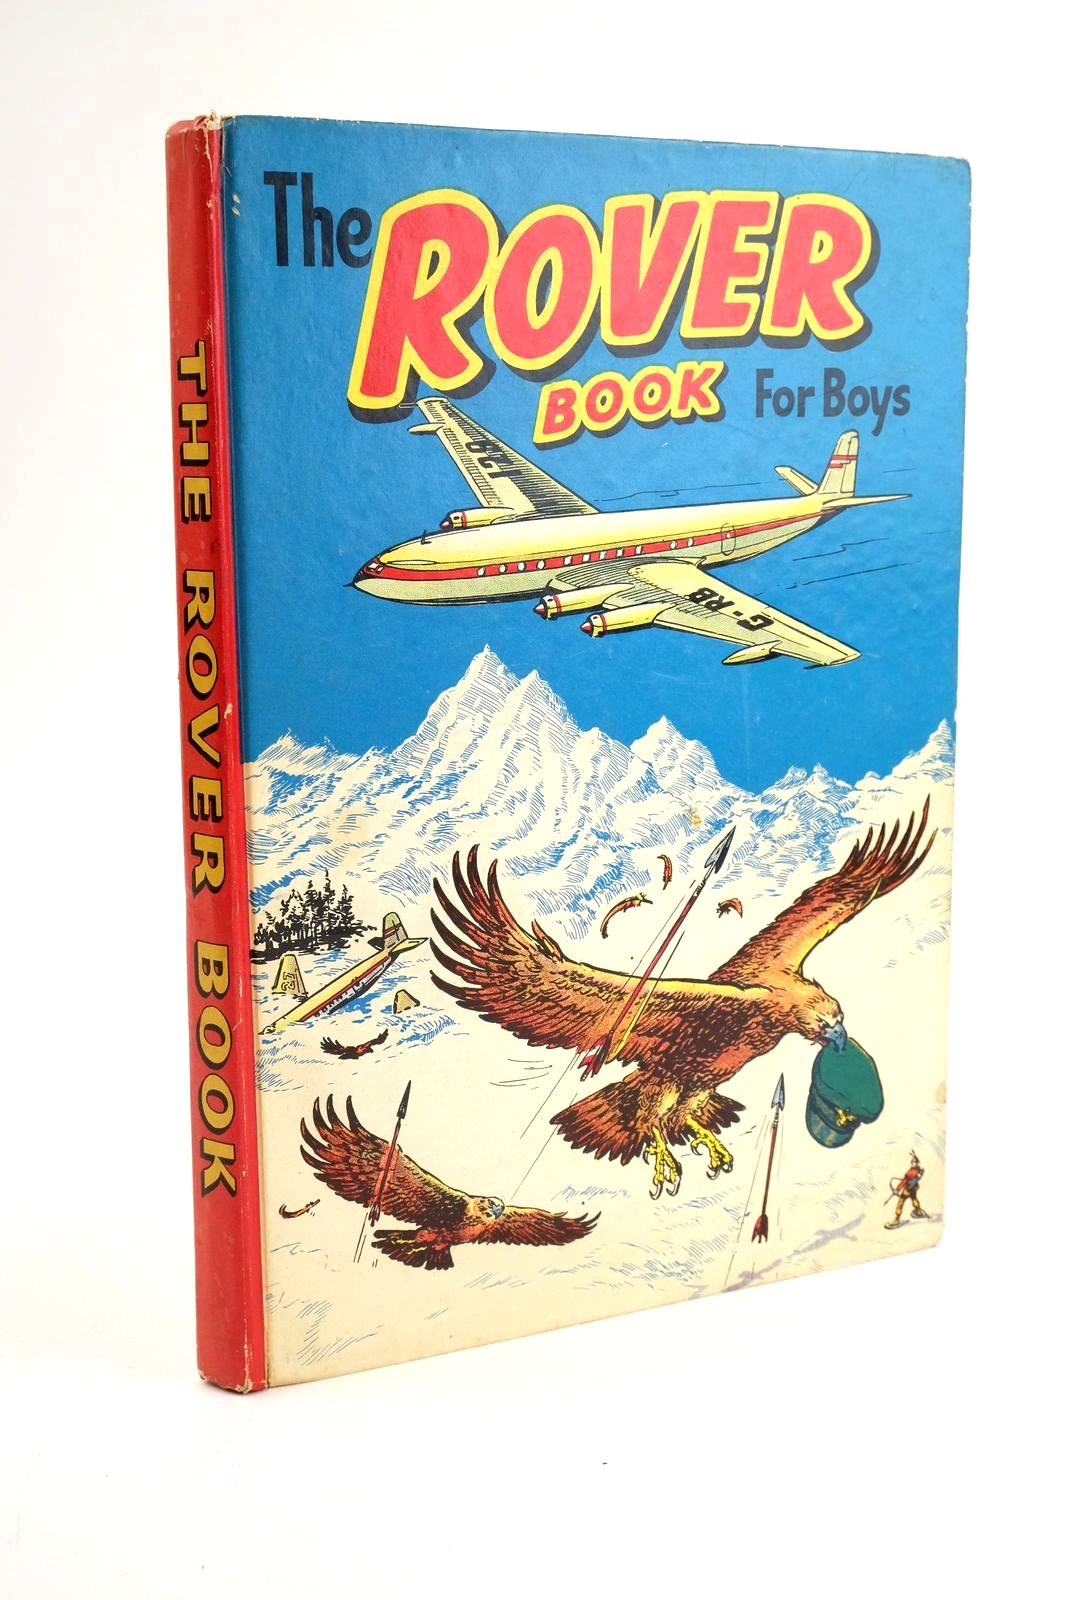 Photo of THE ROVER BOOK FOR BOYS 1959 published by D.C. Thomson & Co Ltd. (STOCK CODE: 1323569)  for sale by Stella & Rose's Books